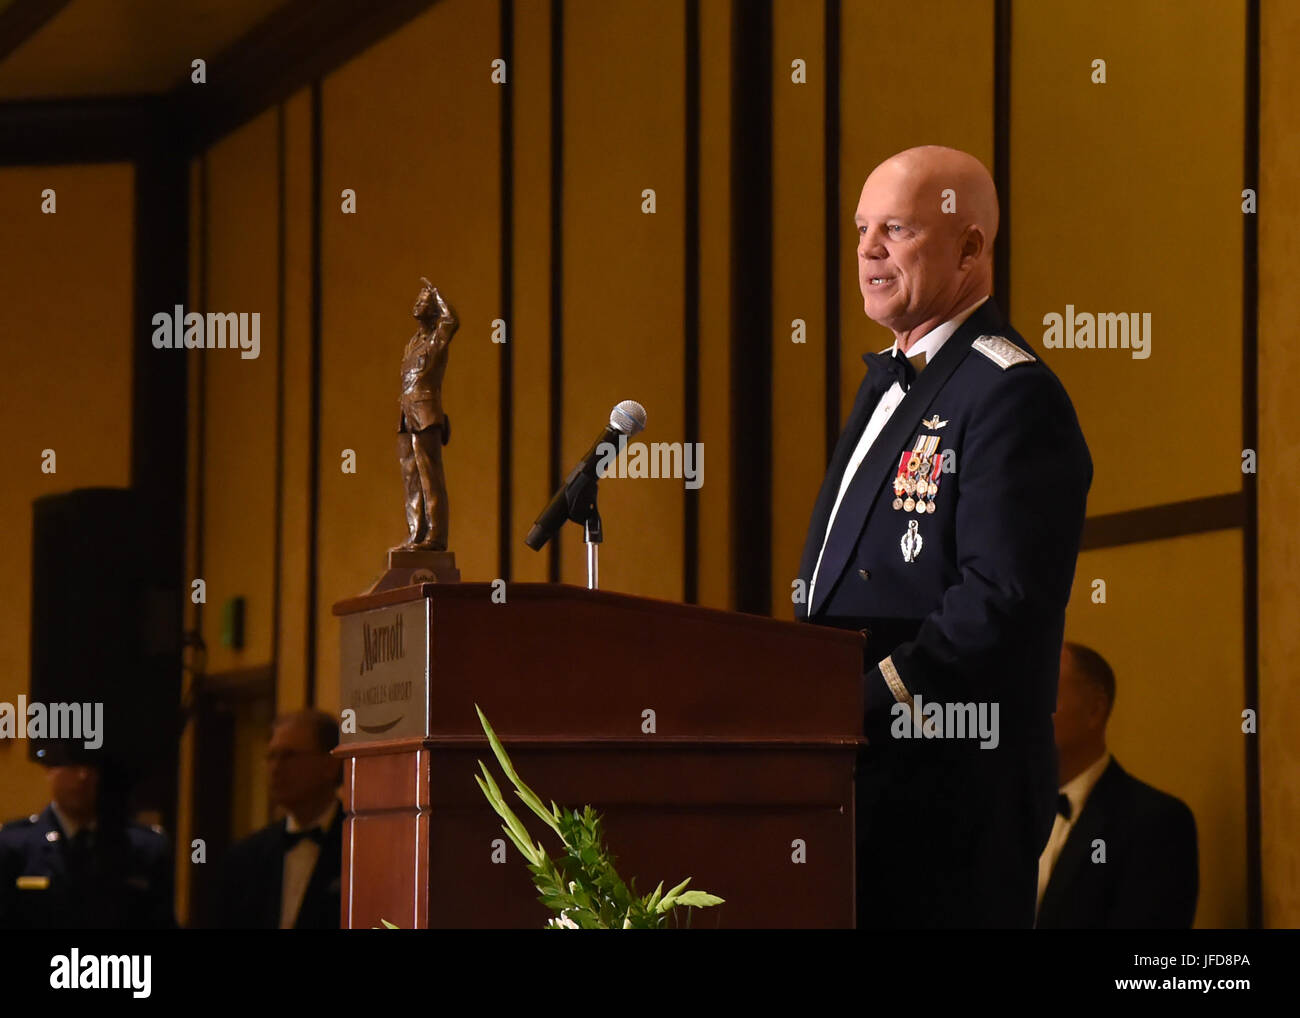 Air Force Gen. John “Jay” Raymond, commander of Air Force Space Command, speaks to the audience at the Air Force Association's 43rd Annual Salute to SMC Banquet, held in El Segundo Calif., June 09, 2017.  Gen. Raymond was awarded the General Bernard A. Schriever Space Leadership Award, presented by space pioneer Gen. General Bernard A. Schriever's great-grandson, Senior Amn. Brett Schriever.   (U.S. Air Force photo/Sarah Corrice.) Stock Photo